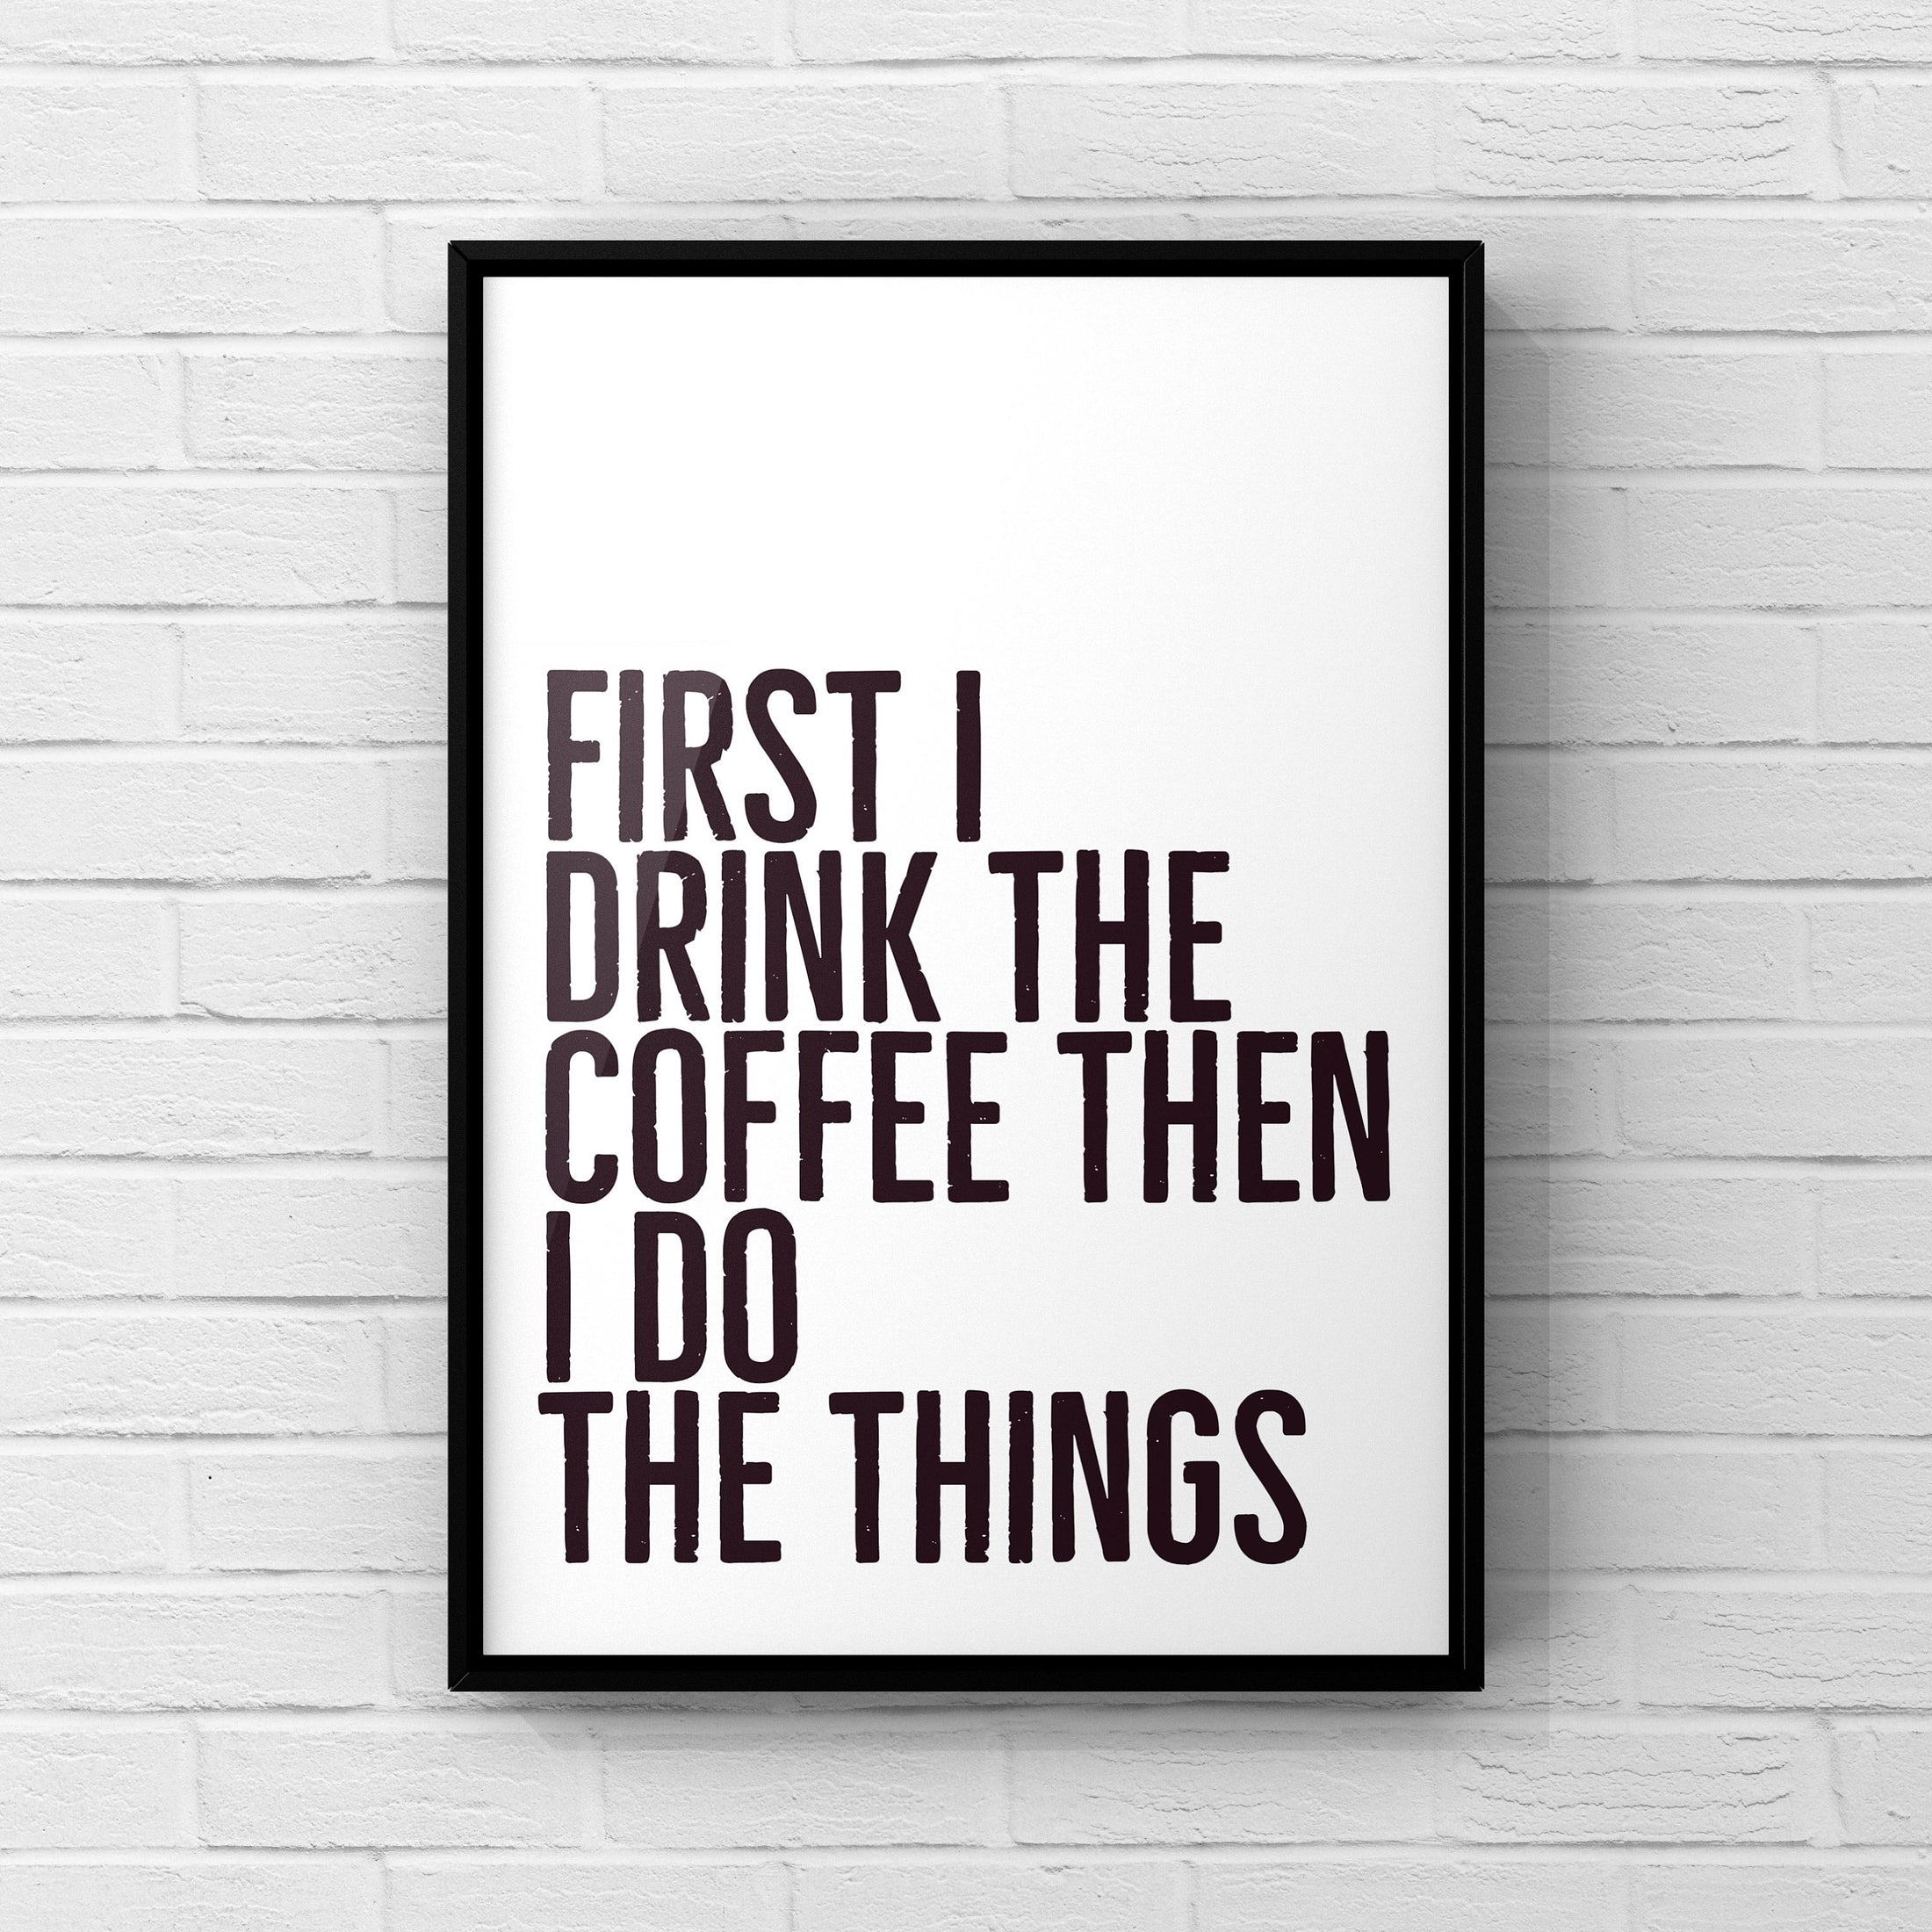 First I drink the coffee